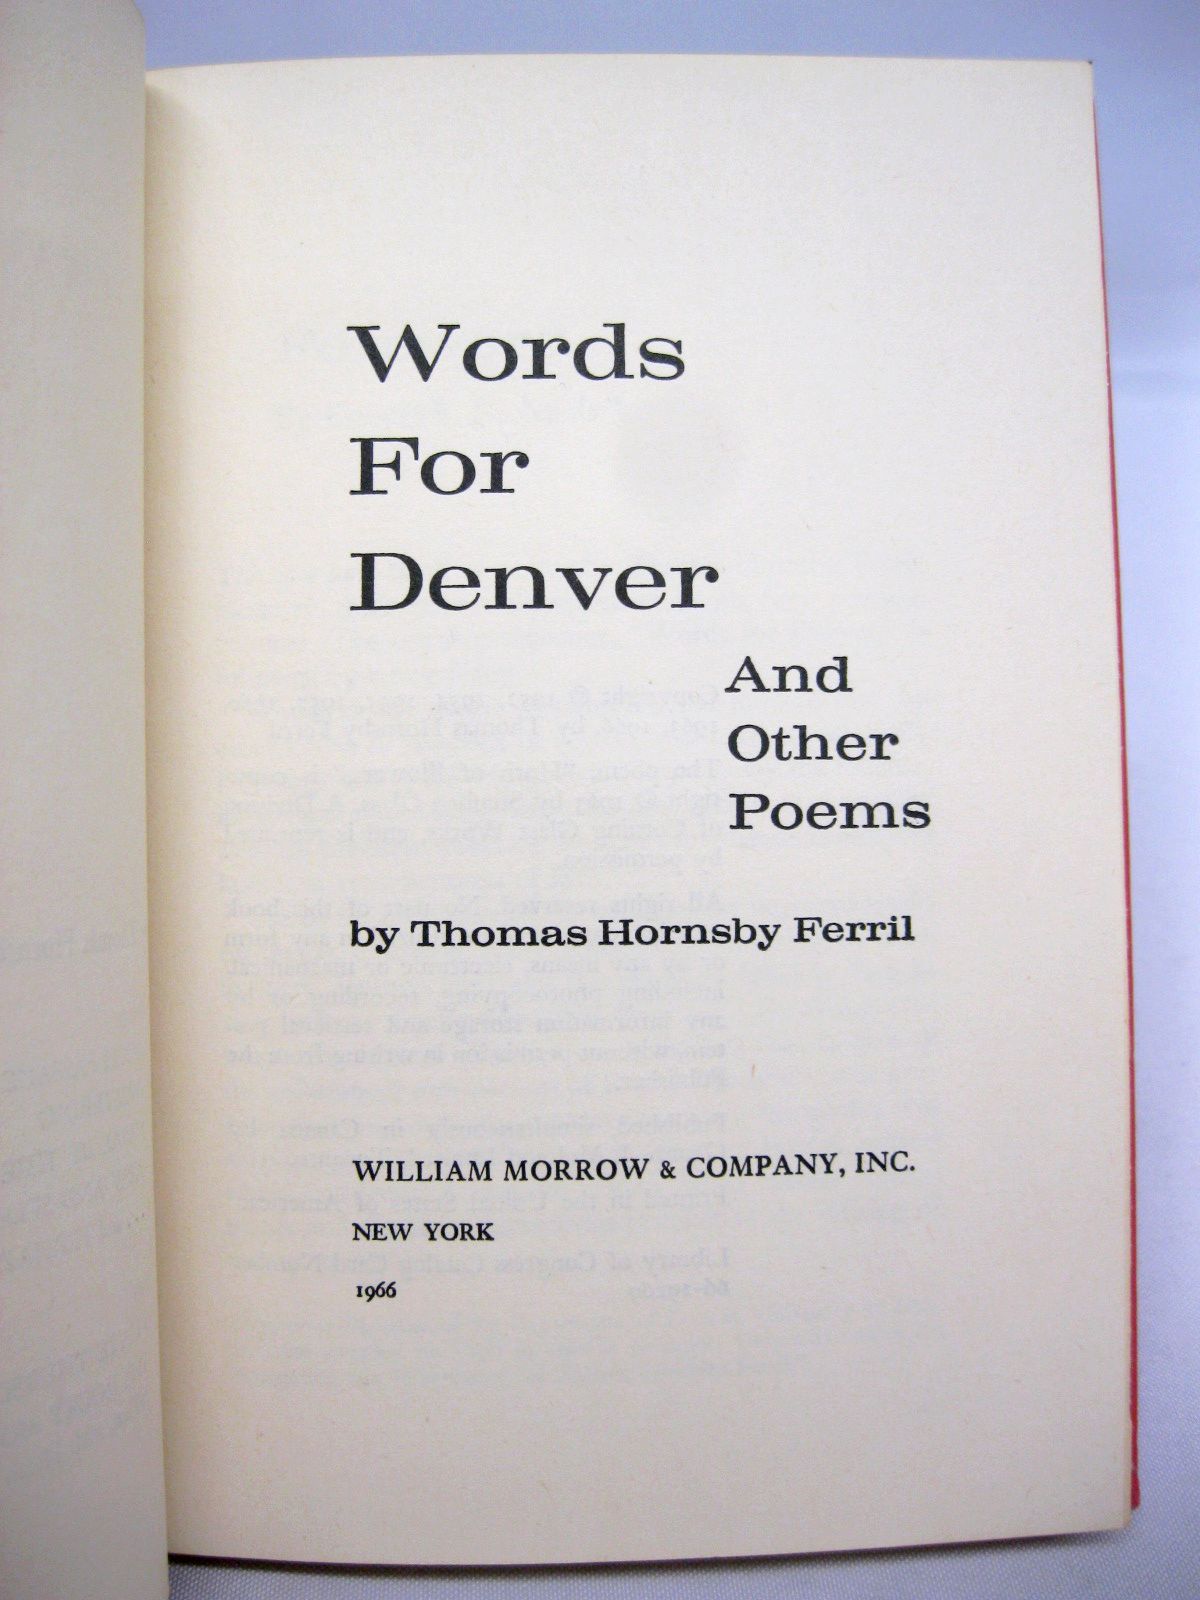 Words for Denver and other poems by Thomas Hornsby Ferril